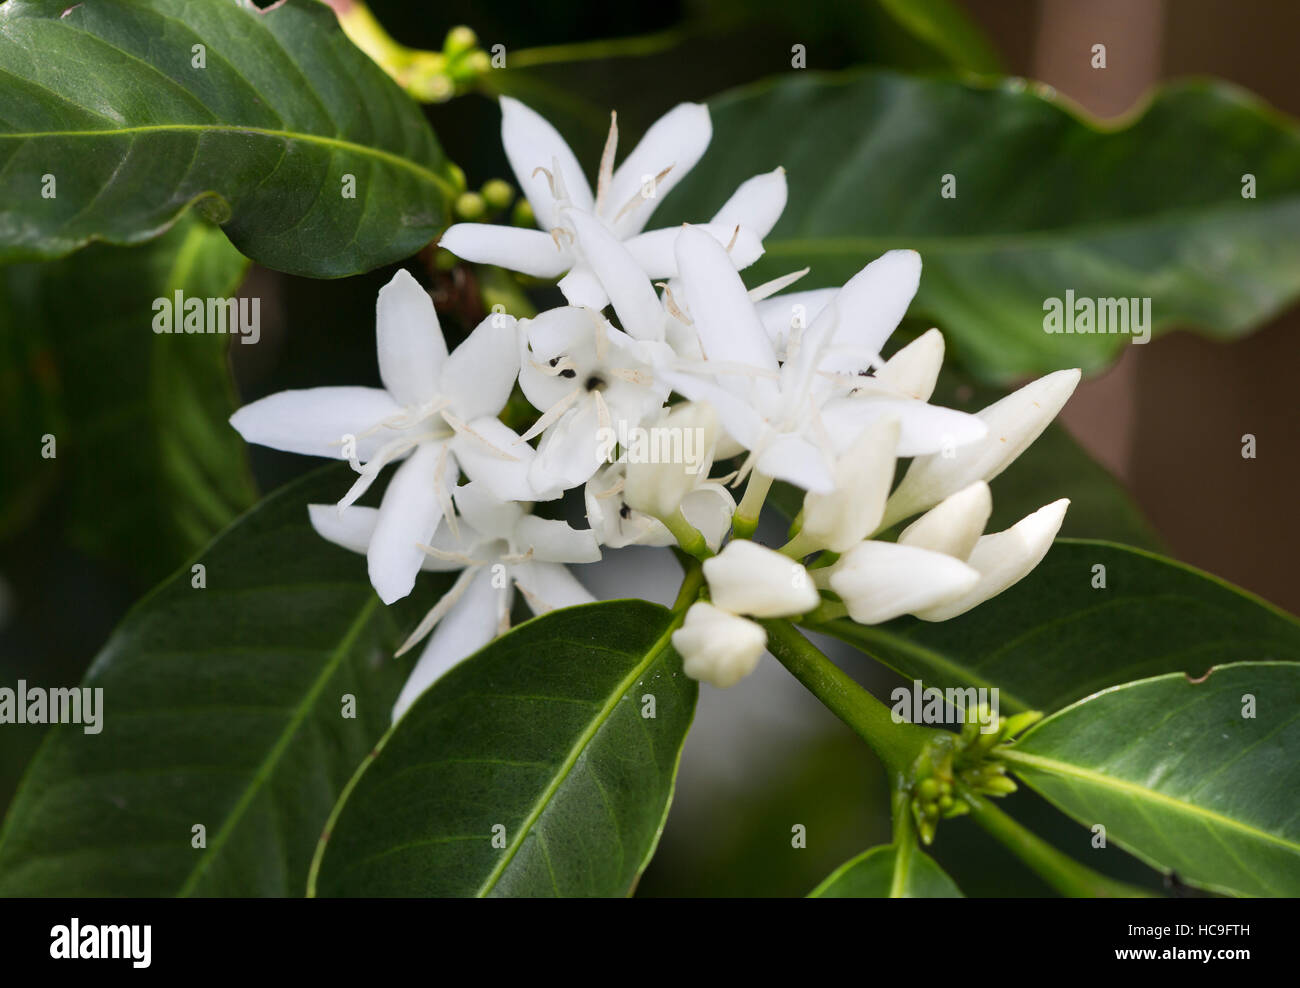 Coffee tree blossom with white flowers. Coffea is a genus of flowering plants belonging to the family Rubiaceae. Stock Photo